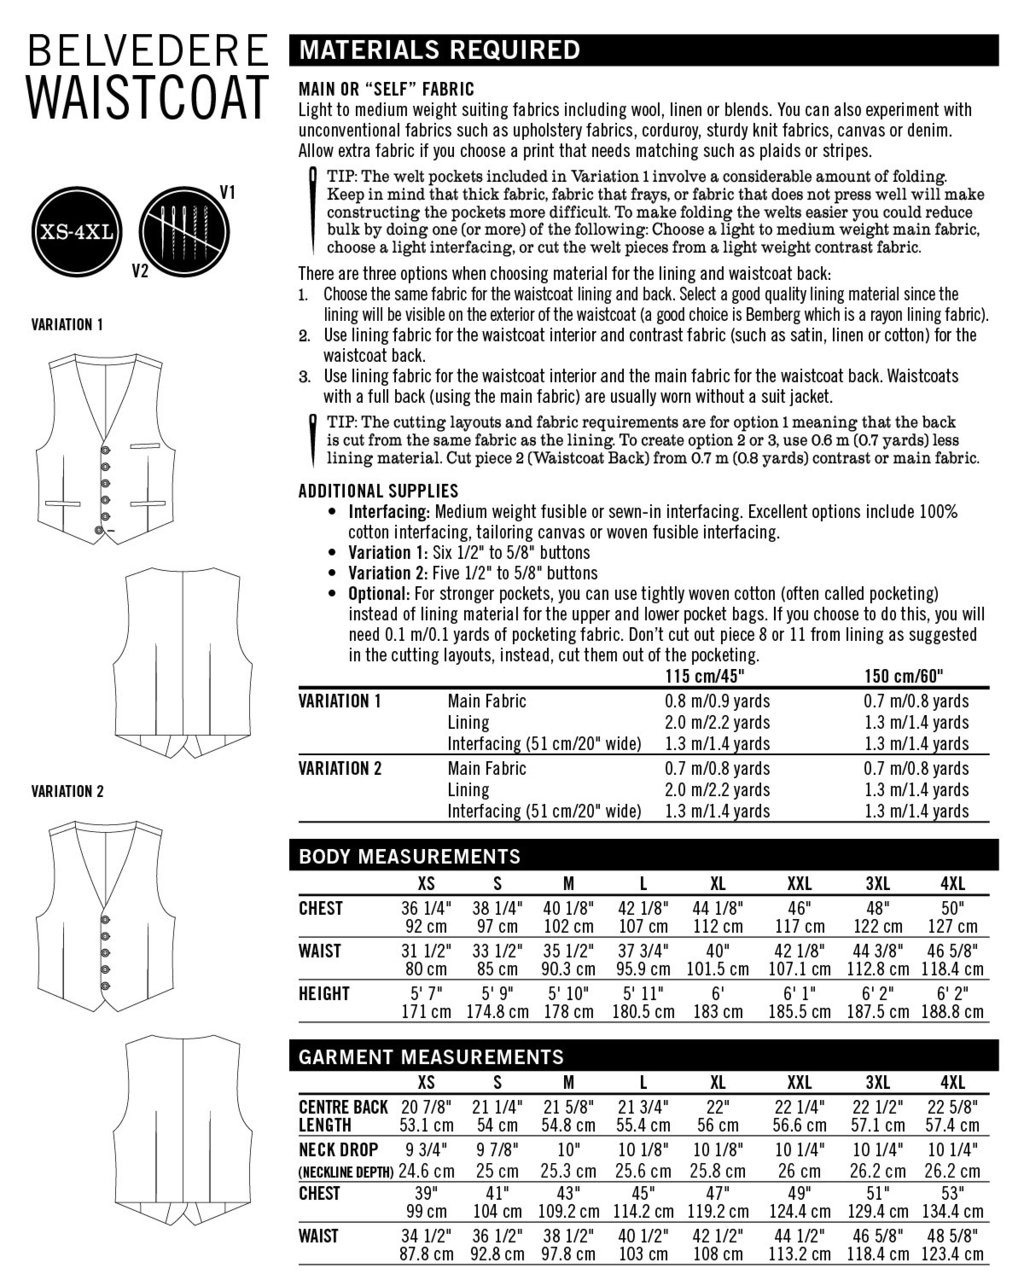 Thread Theory Sewing Patterns at the PatternReview.com online